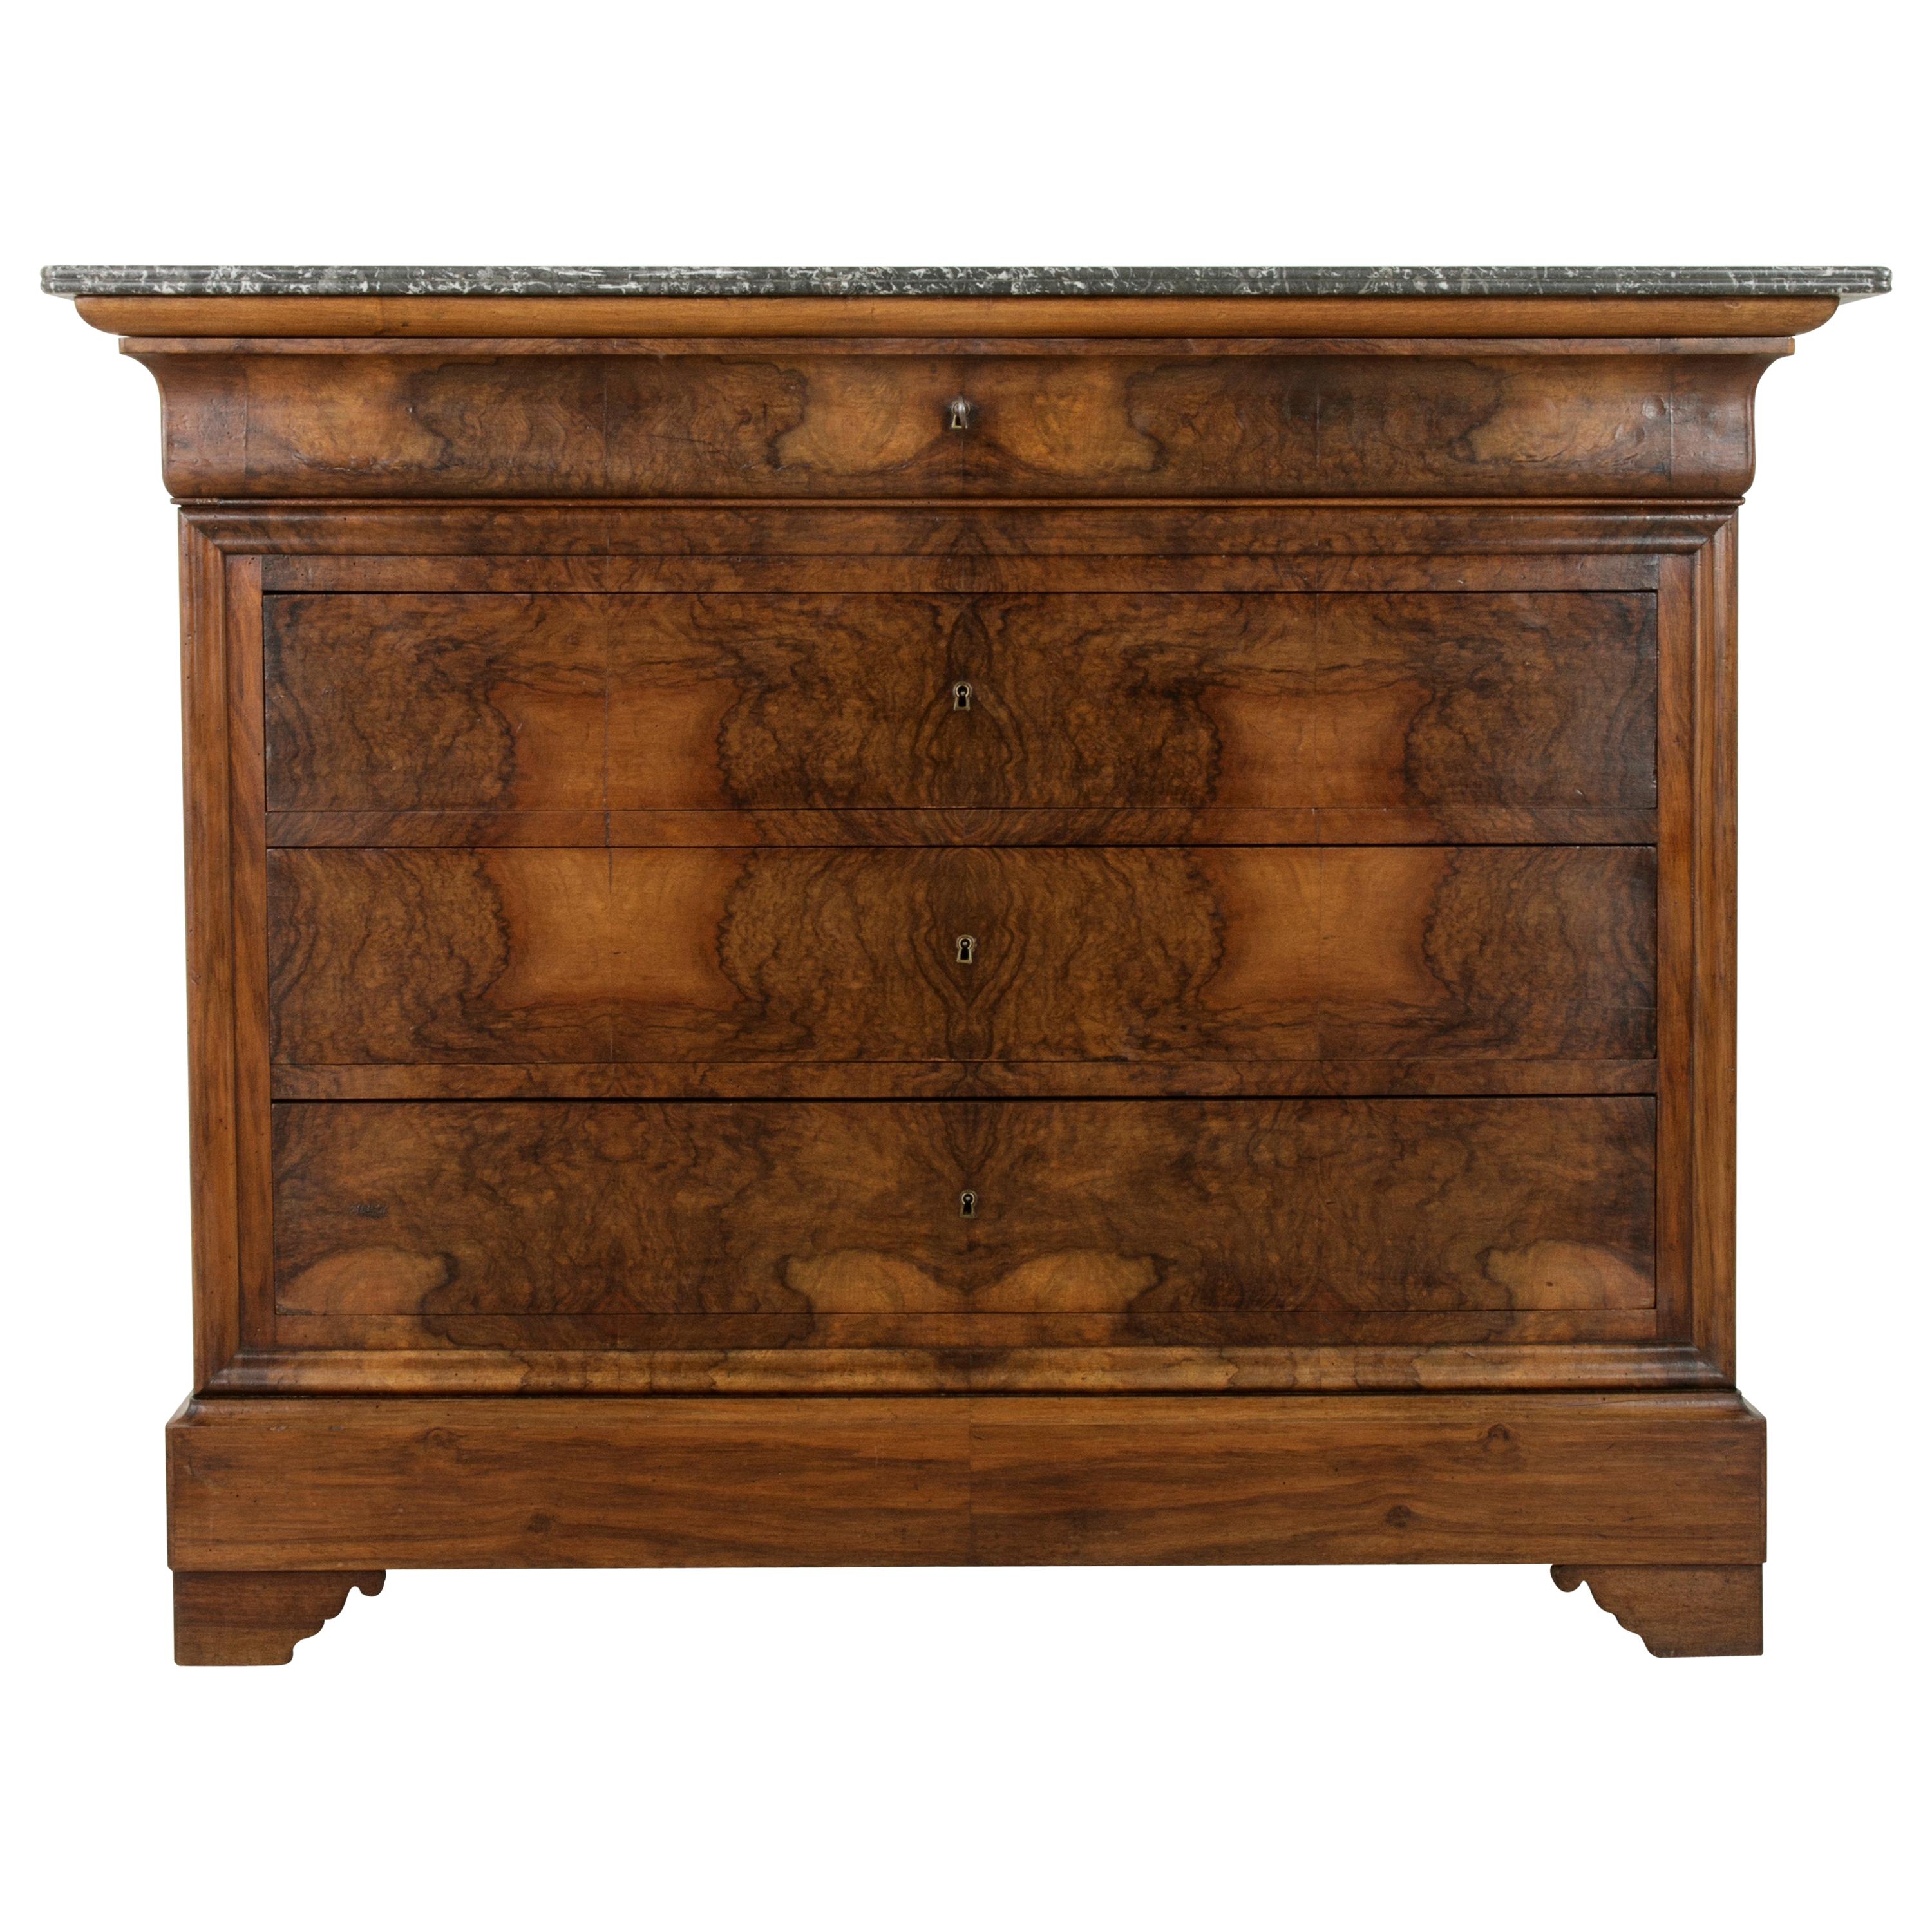 19th Century French Louis Philippe Period Burl Walnut Commode or Chest, Marble